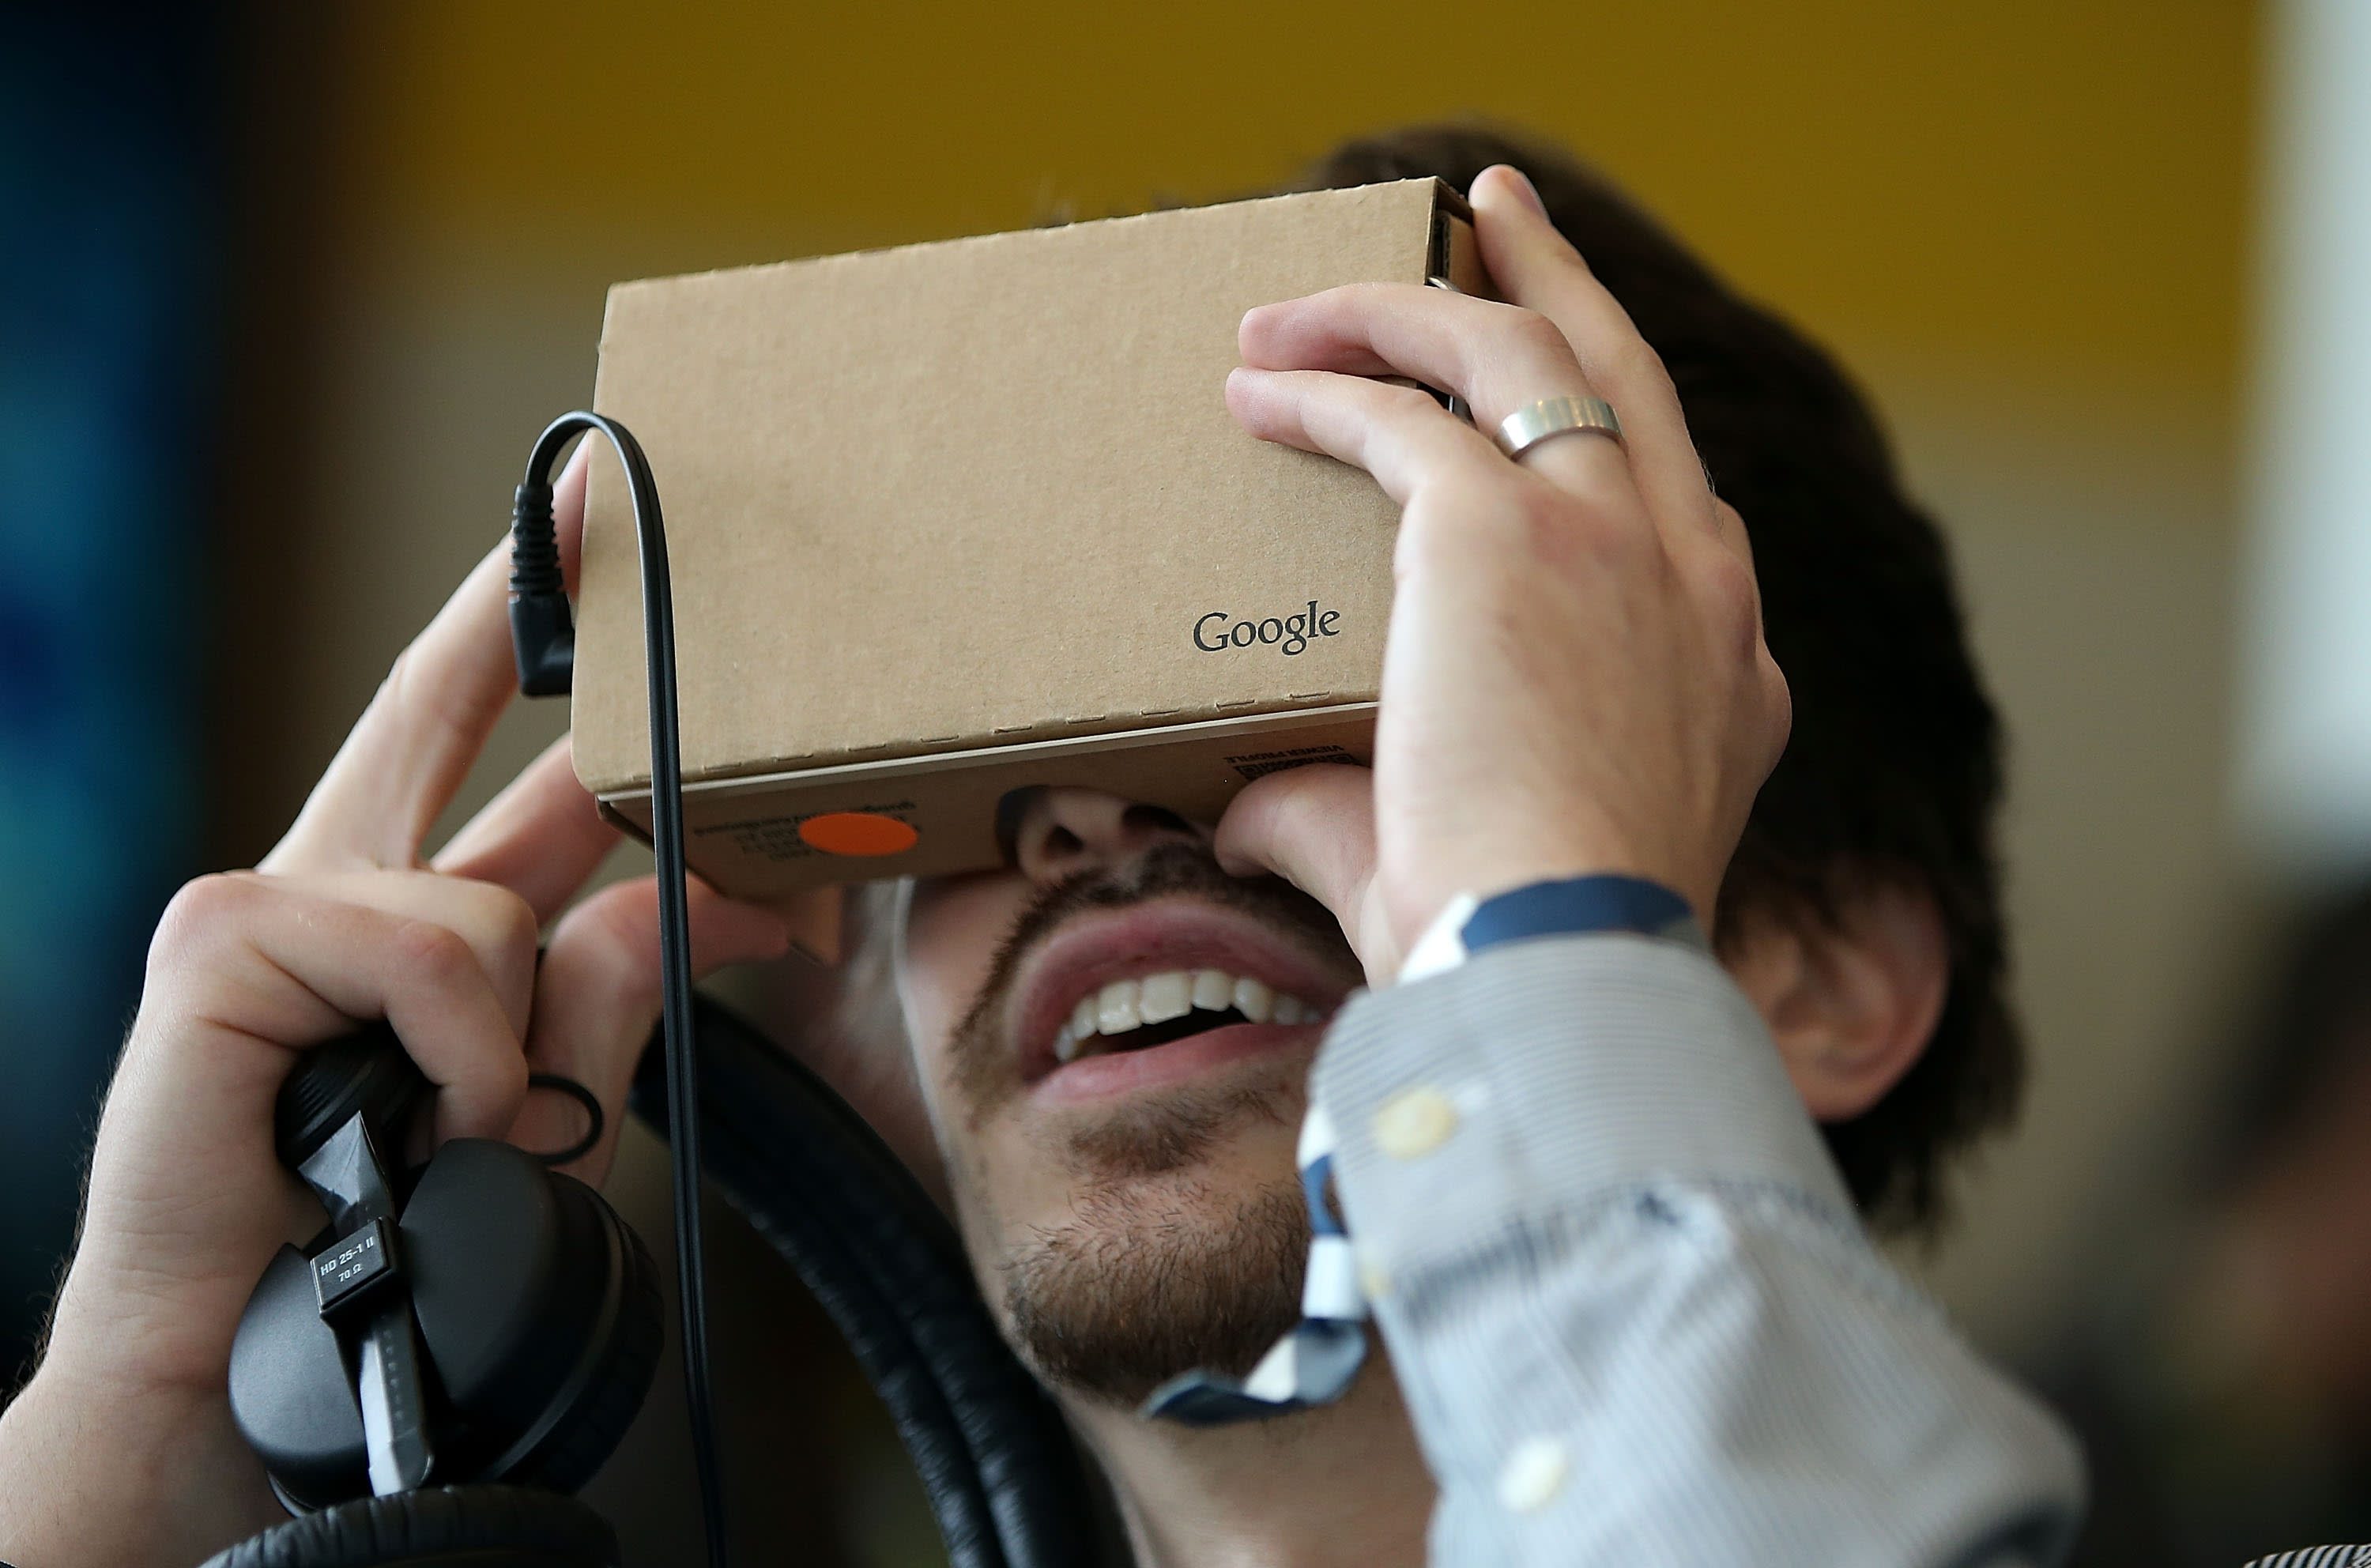 google-stops-selling-its-cardboard-vr-goggles-after-seven-years-engadget